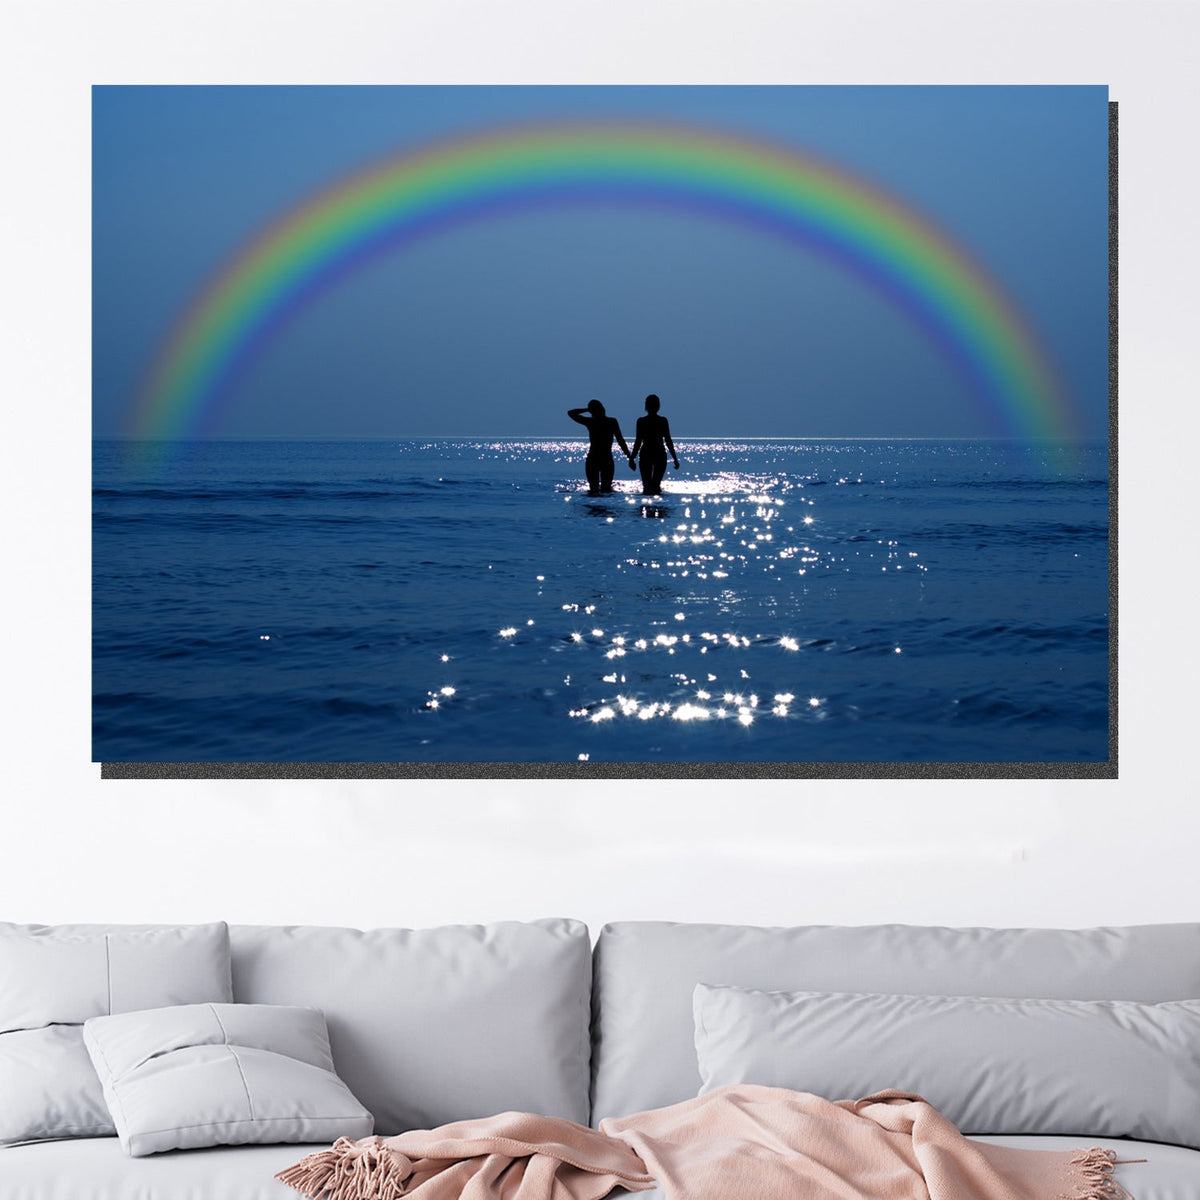 https://cdn.shopify.com/s/files/1/0387/9986/8044/products/LoveIsaRainbowCanvasArtprintStretched-4.jpg